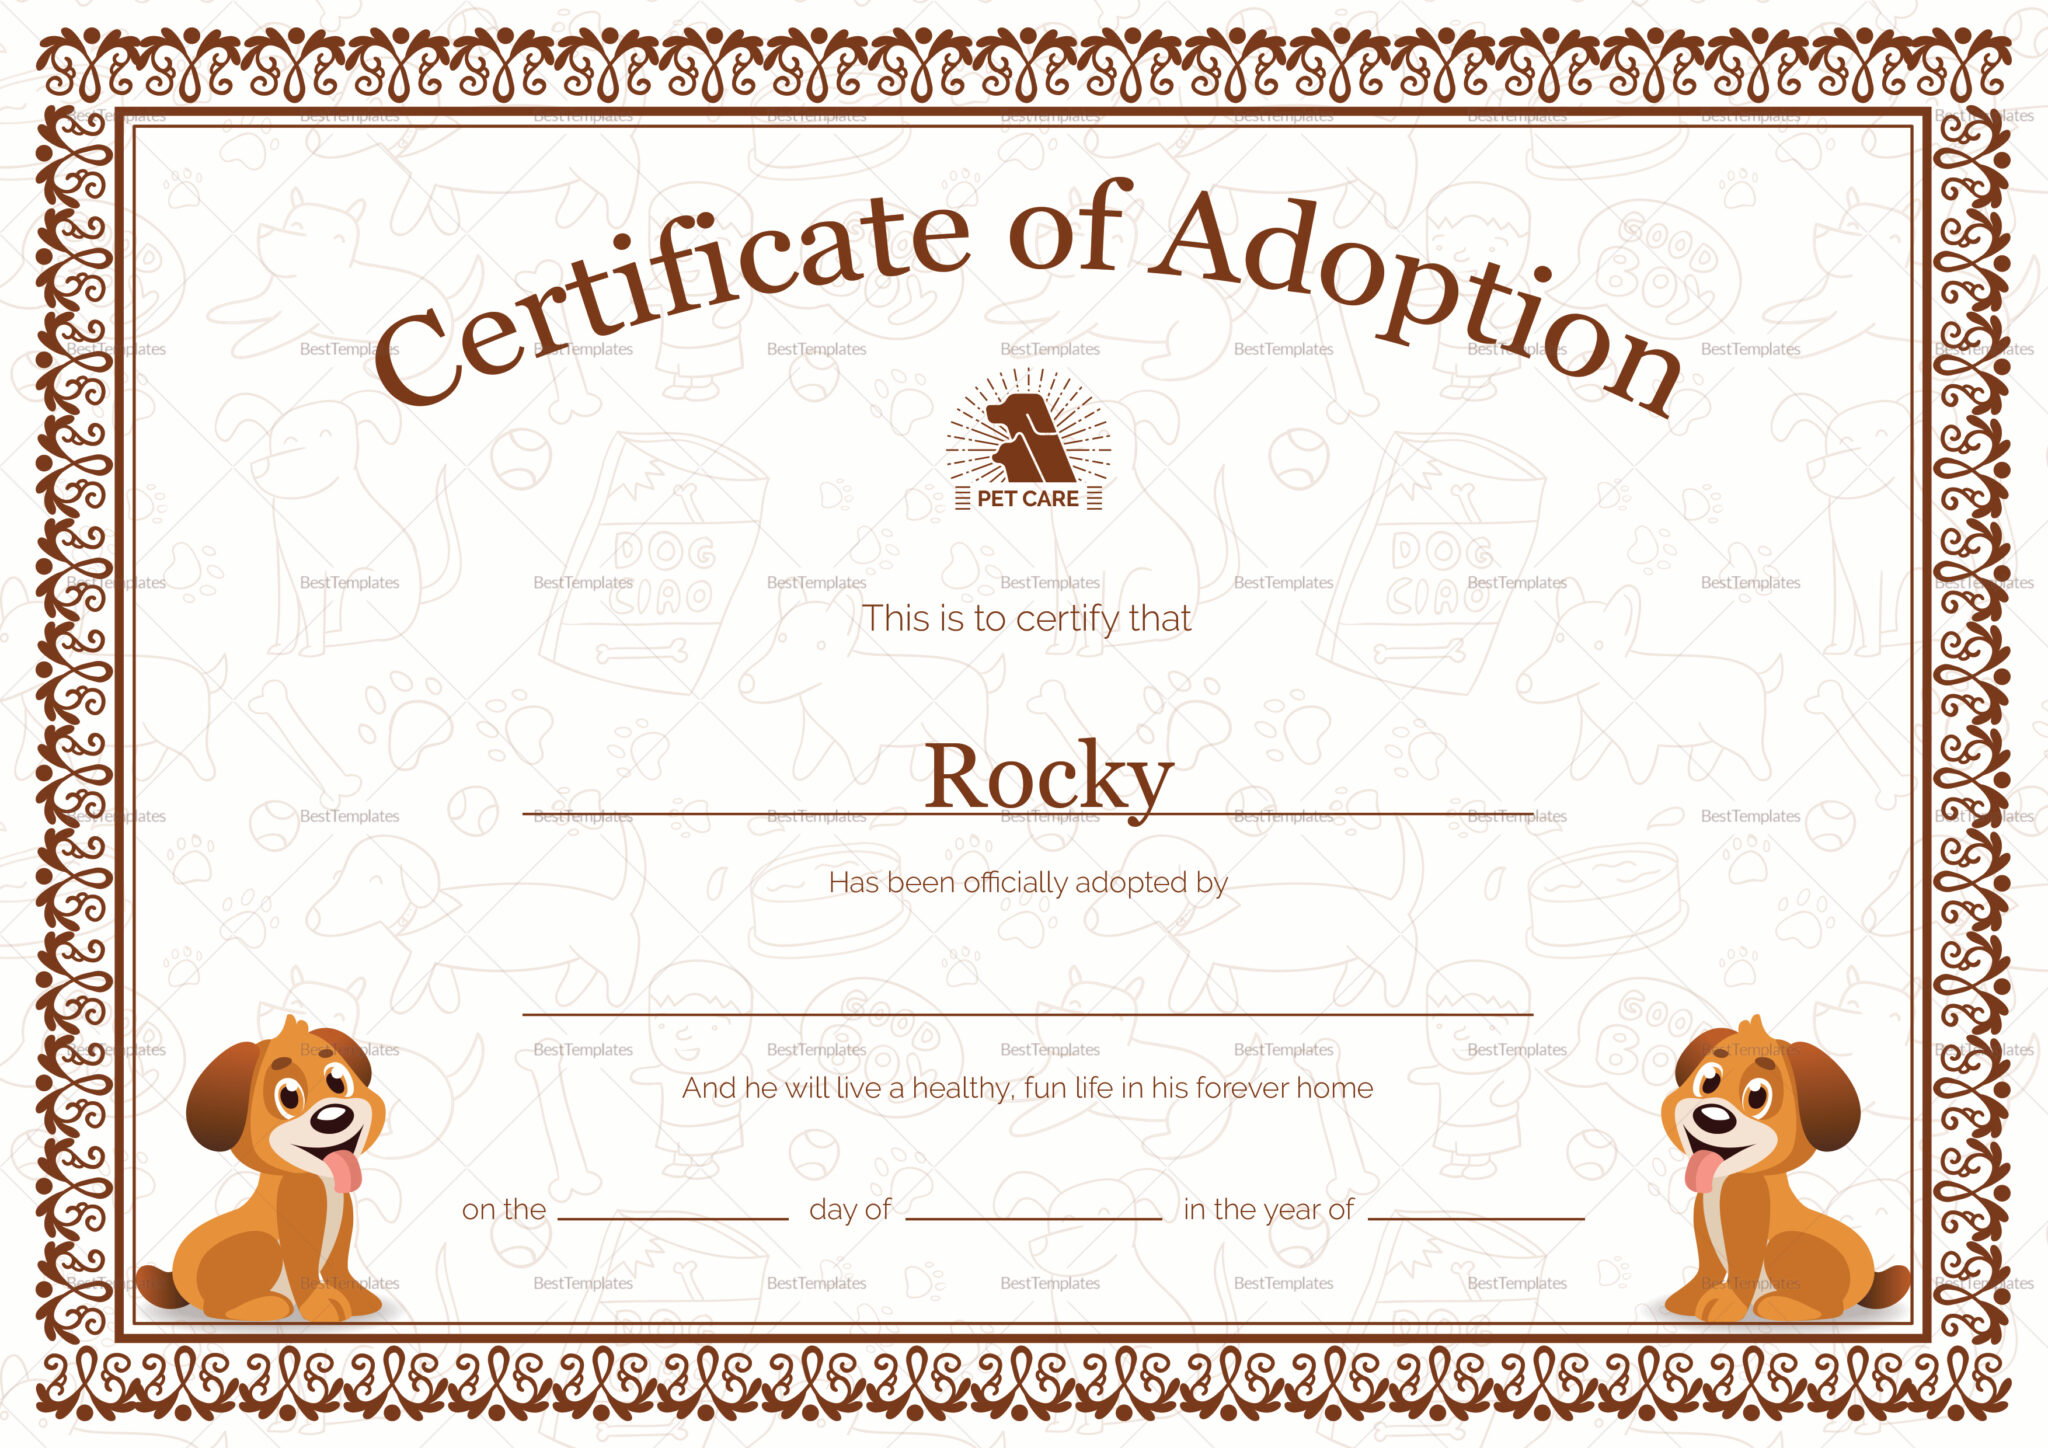 kitten-adoption-certificate-with-child-adoption-certificate-template